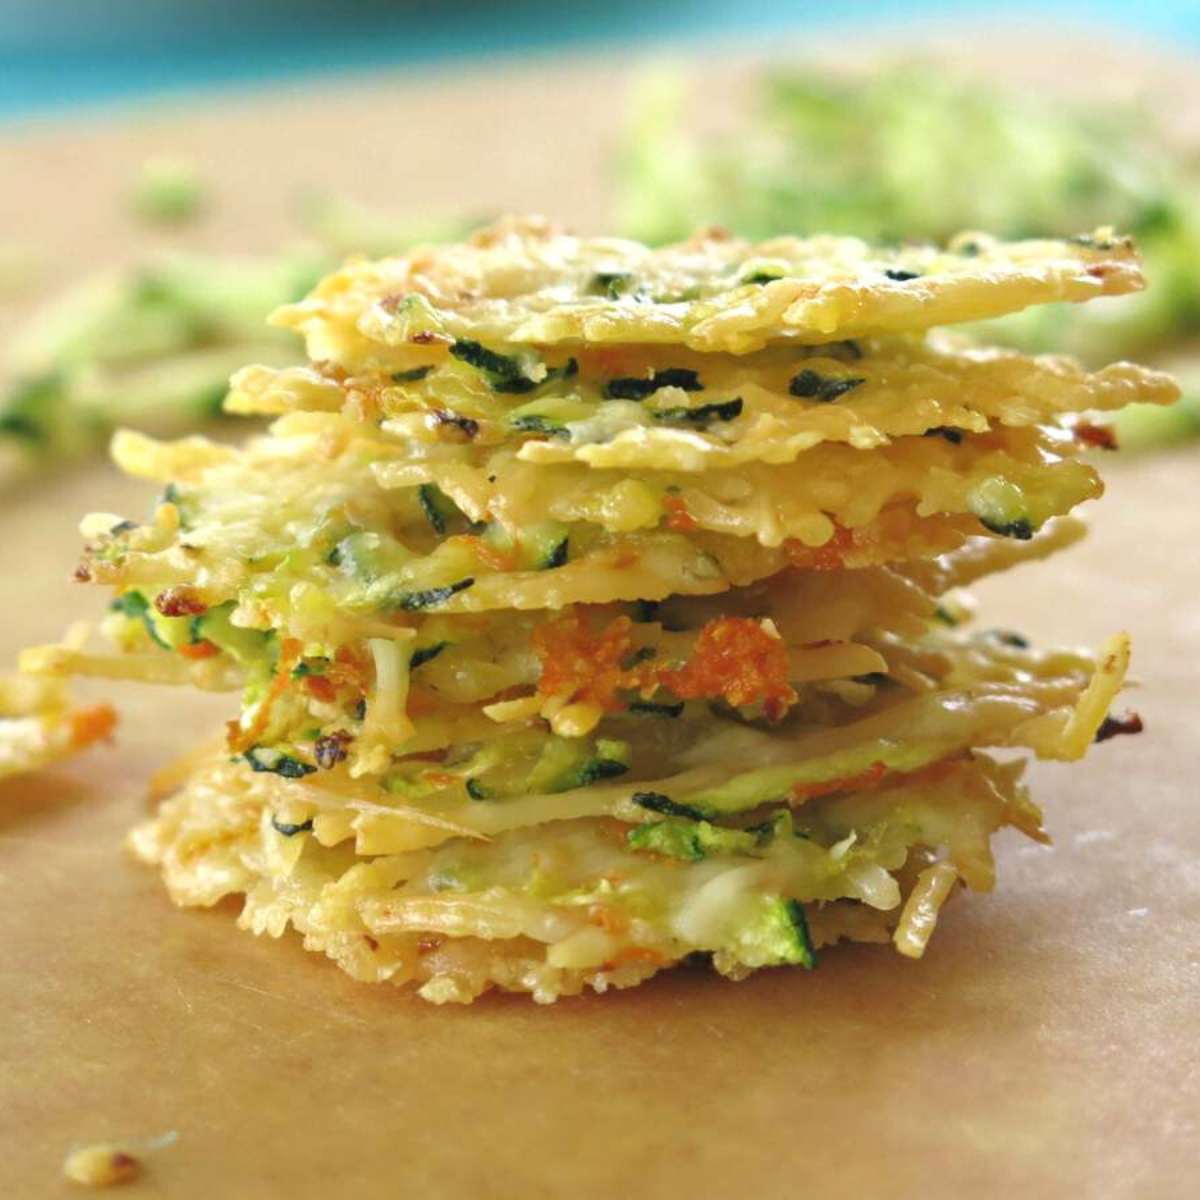 Seven Parmesan Cheese Crisps oven-baked with shredded zucchini and carrot stacked in a pile.